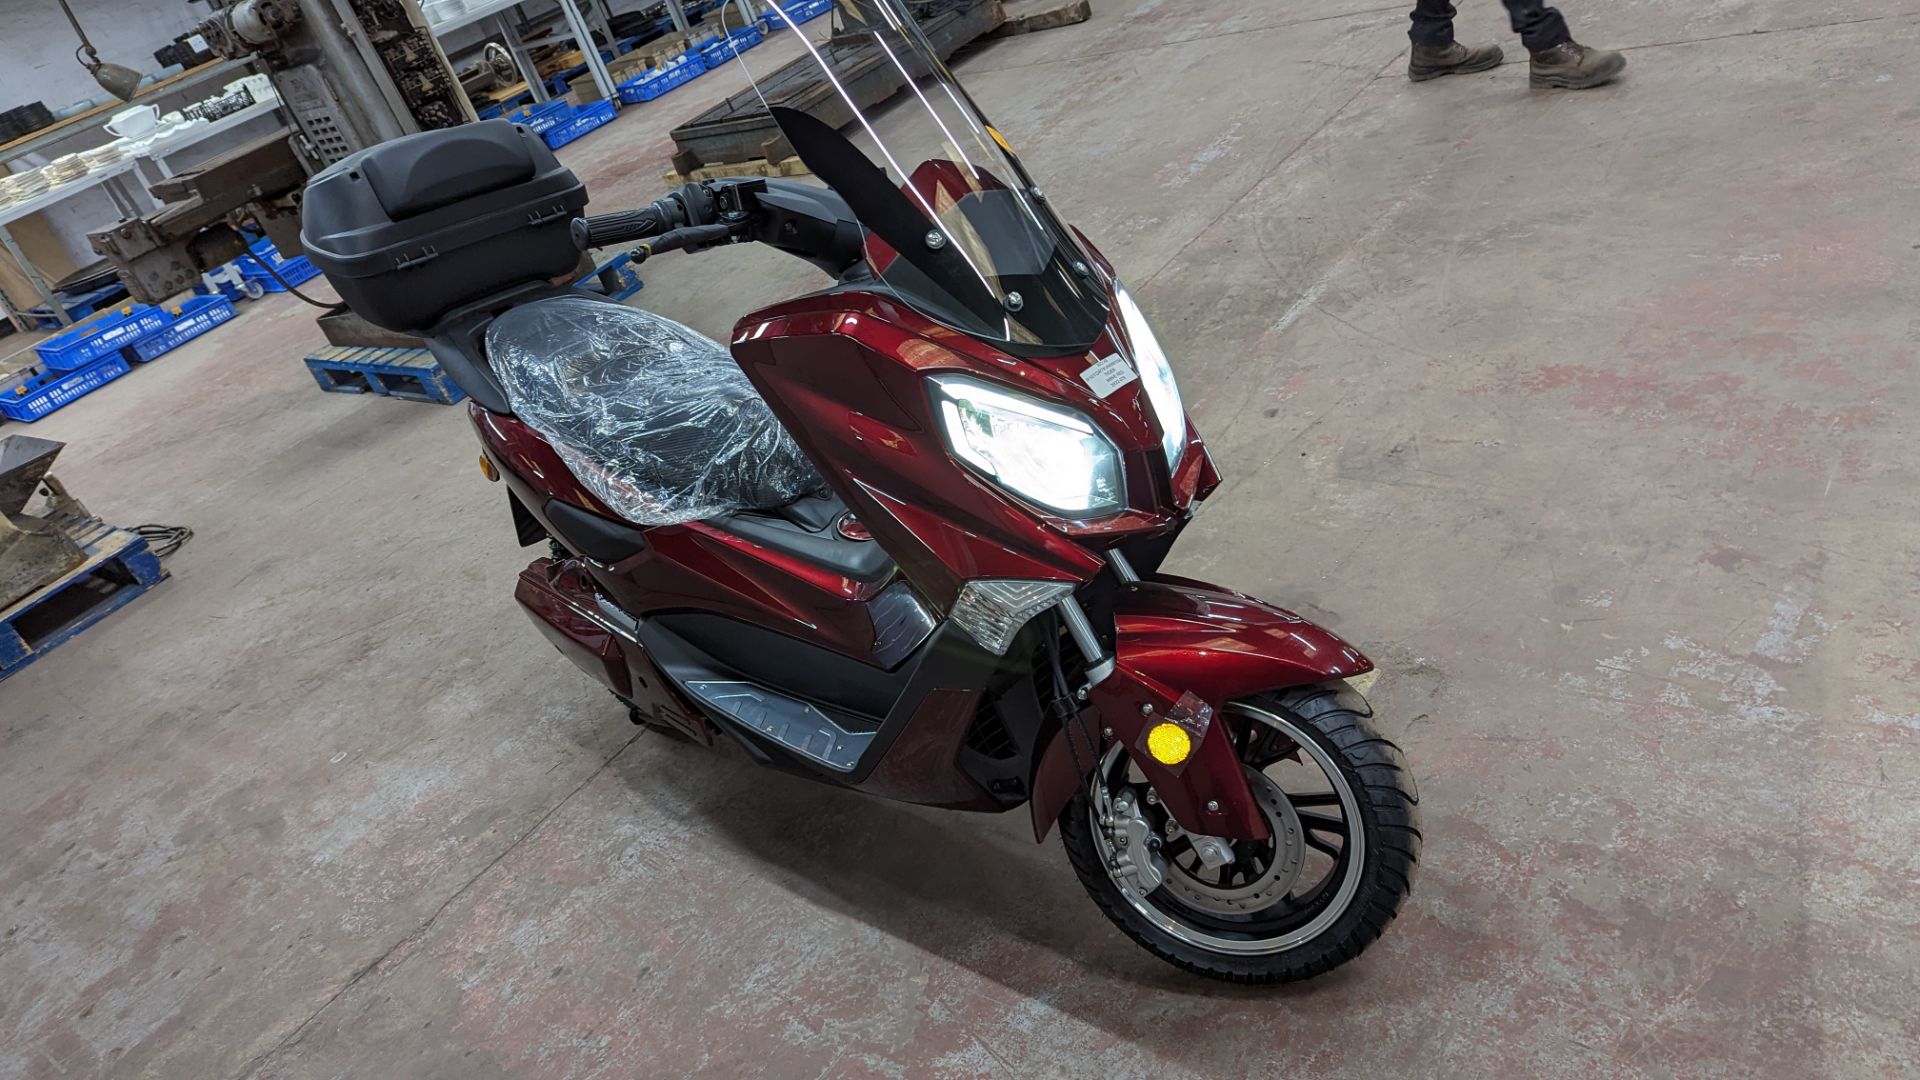 Model 65 Electric High Power Motorbike: Delivery Miles (only 1 recorded km), wine red body with blac - Image 6 of 17